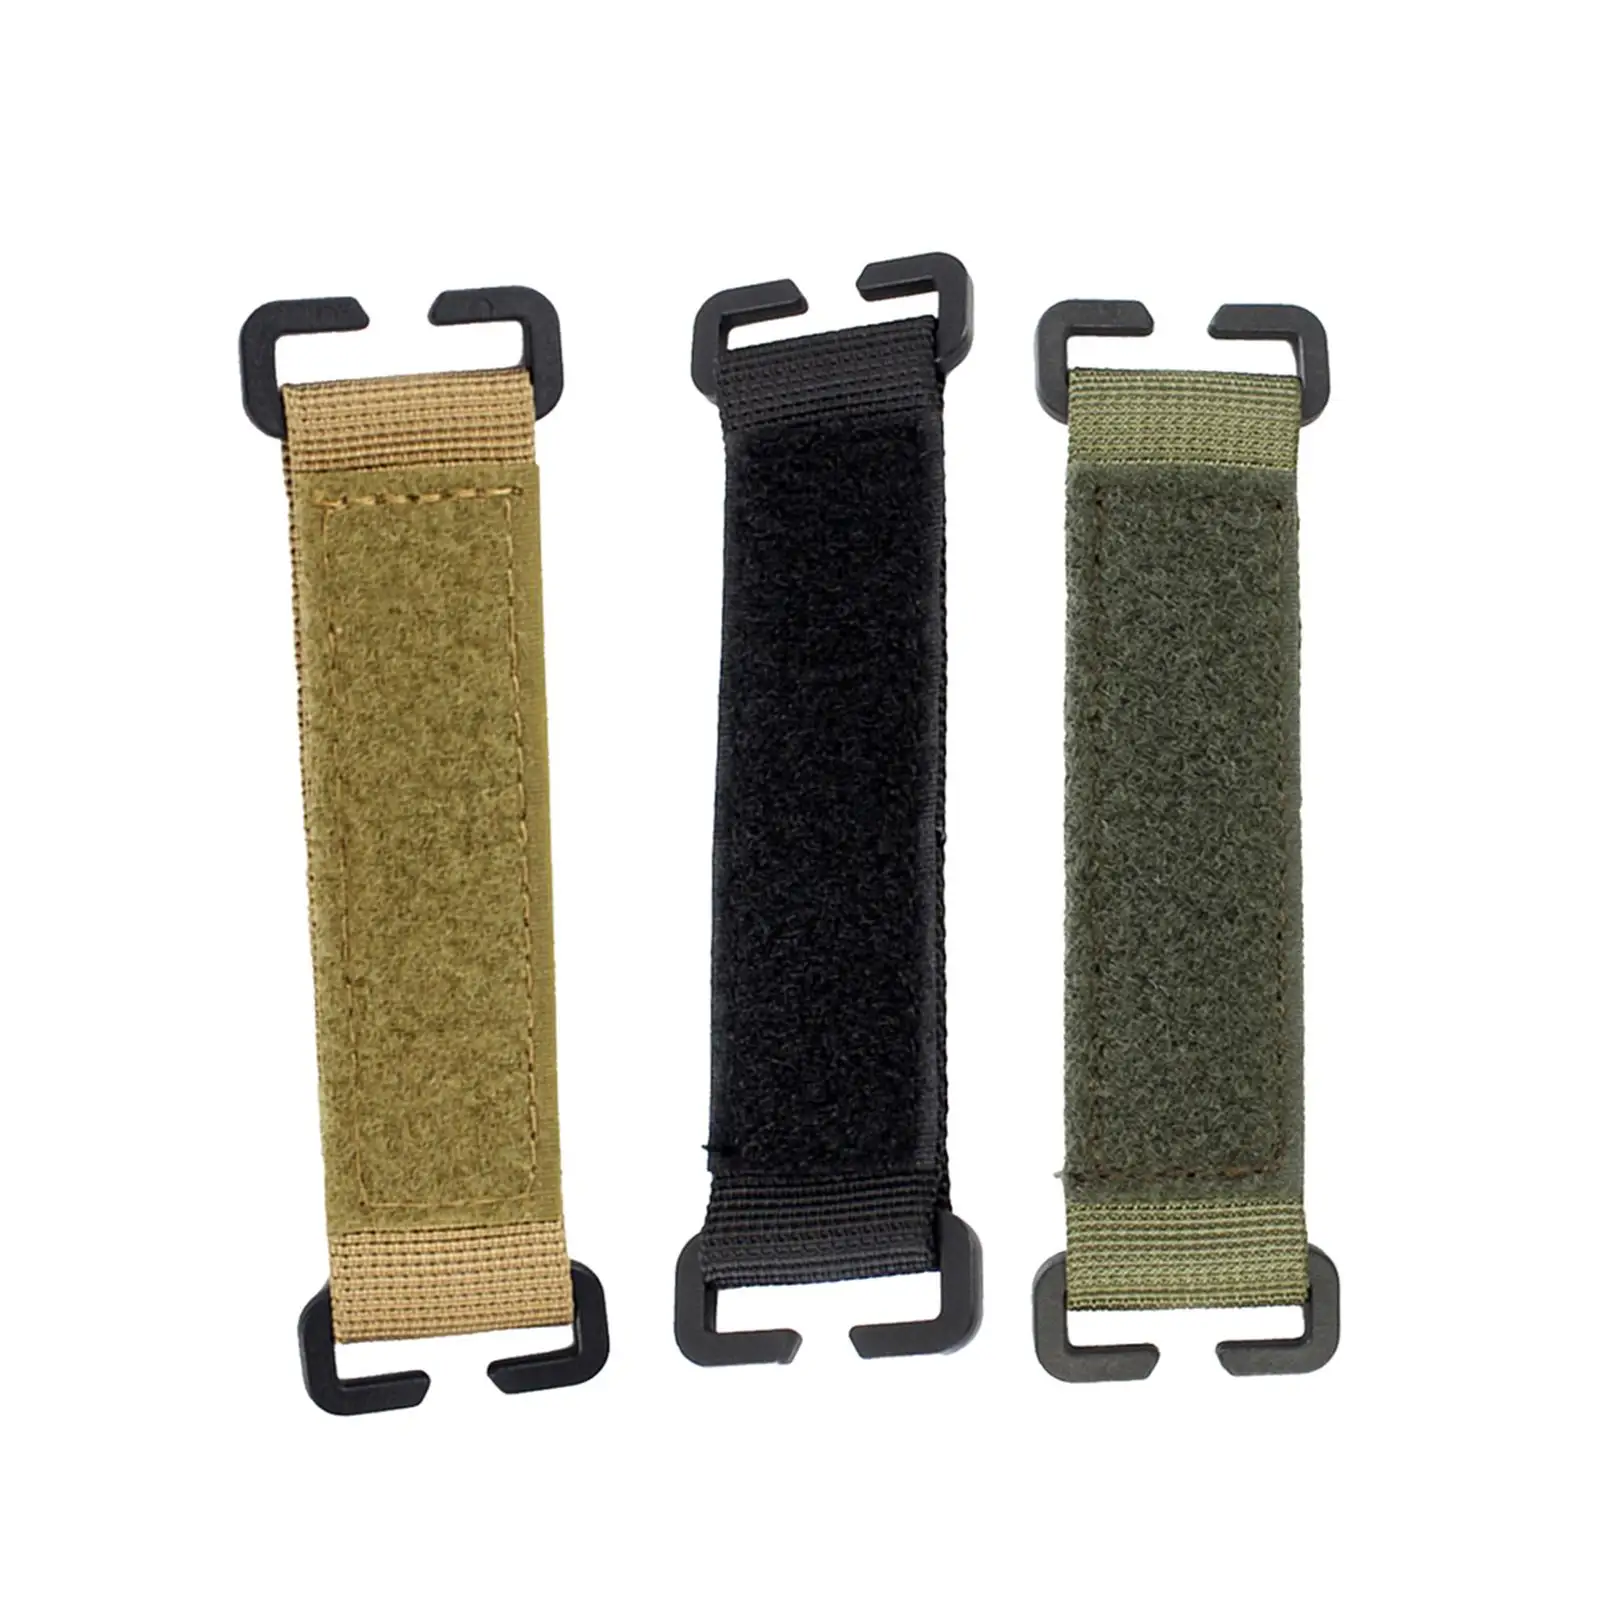 Outdoor Tactical Backpack Nylon Tape Clip On Sticker Patch Couture Clothing Accessories Tactical Equipment